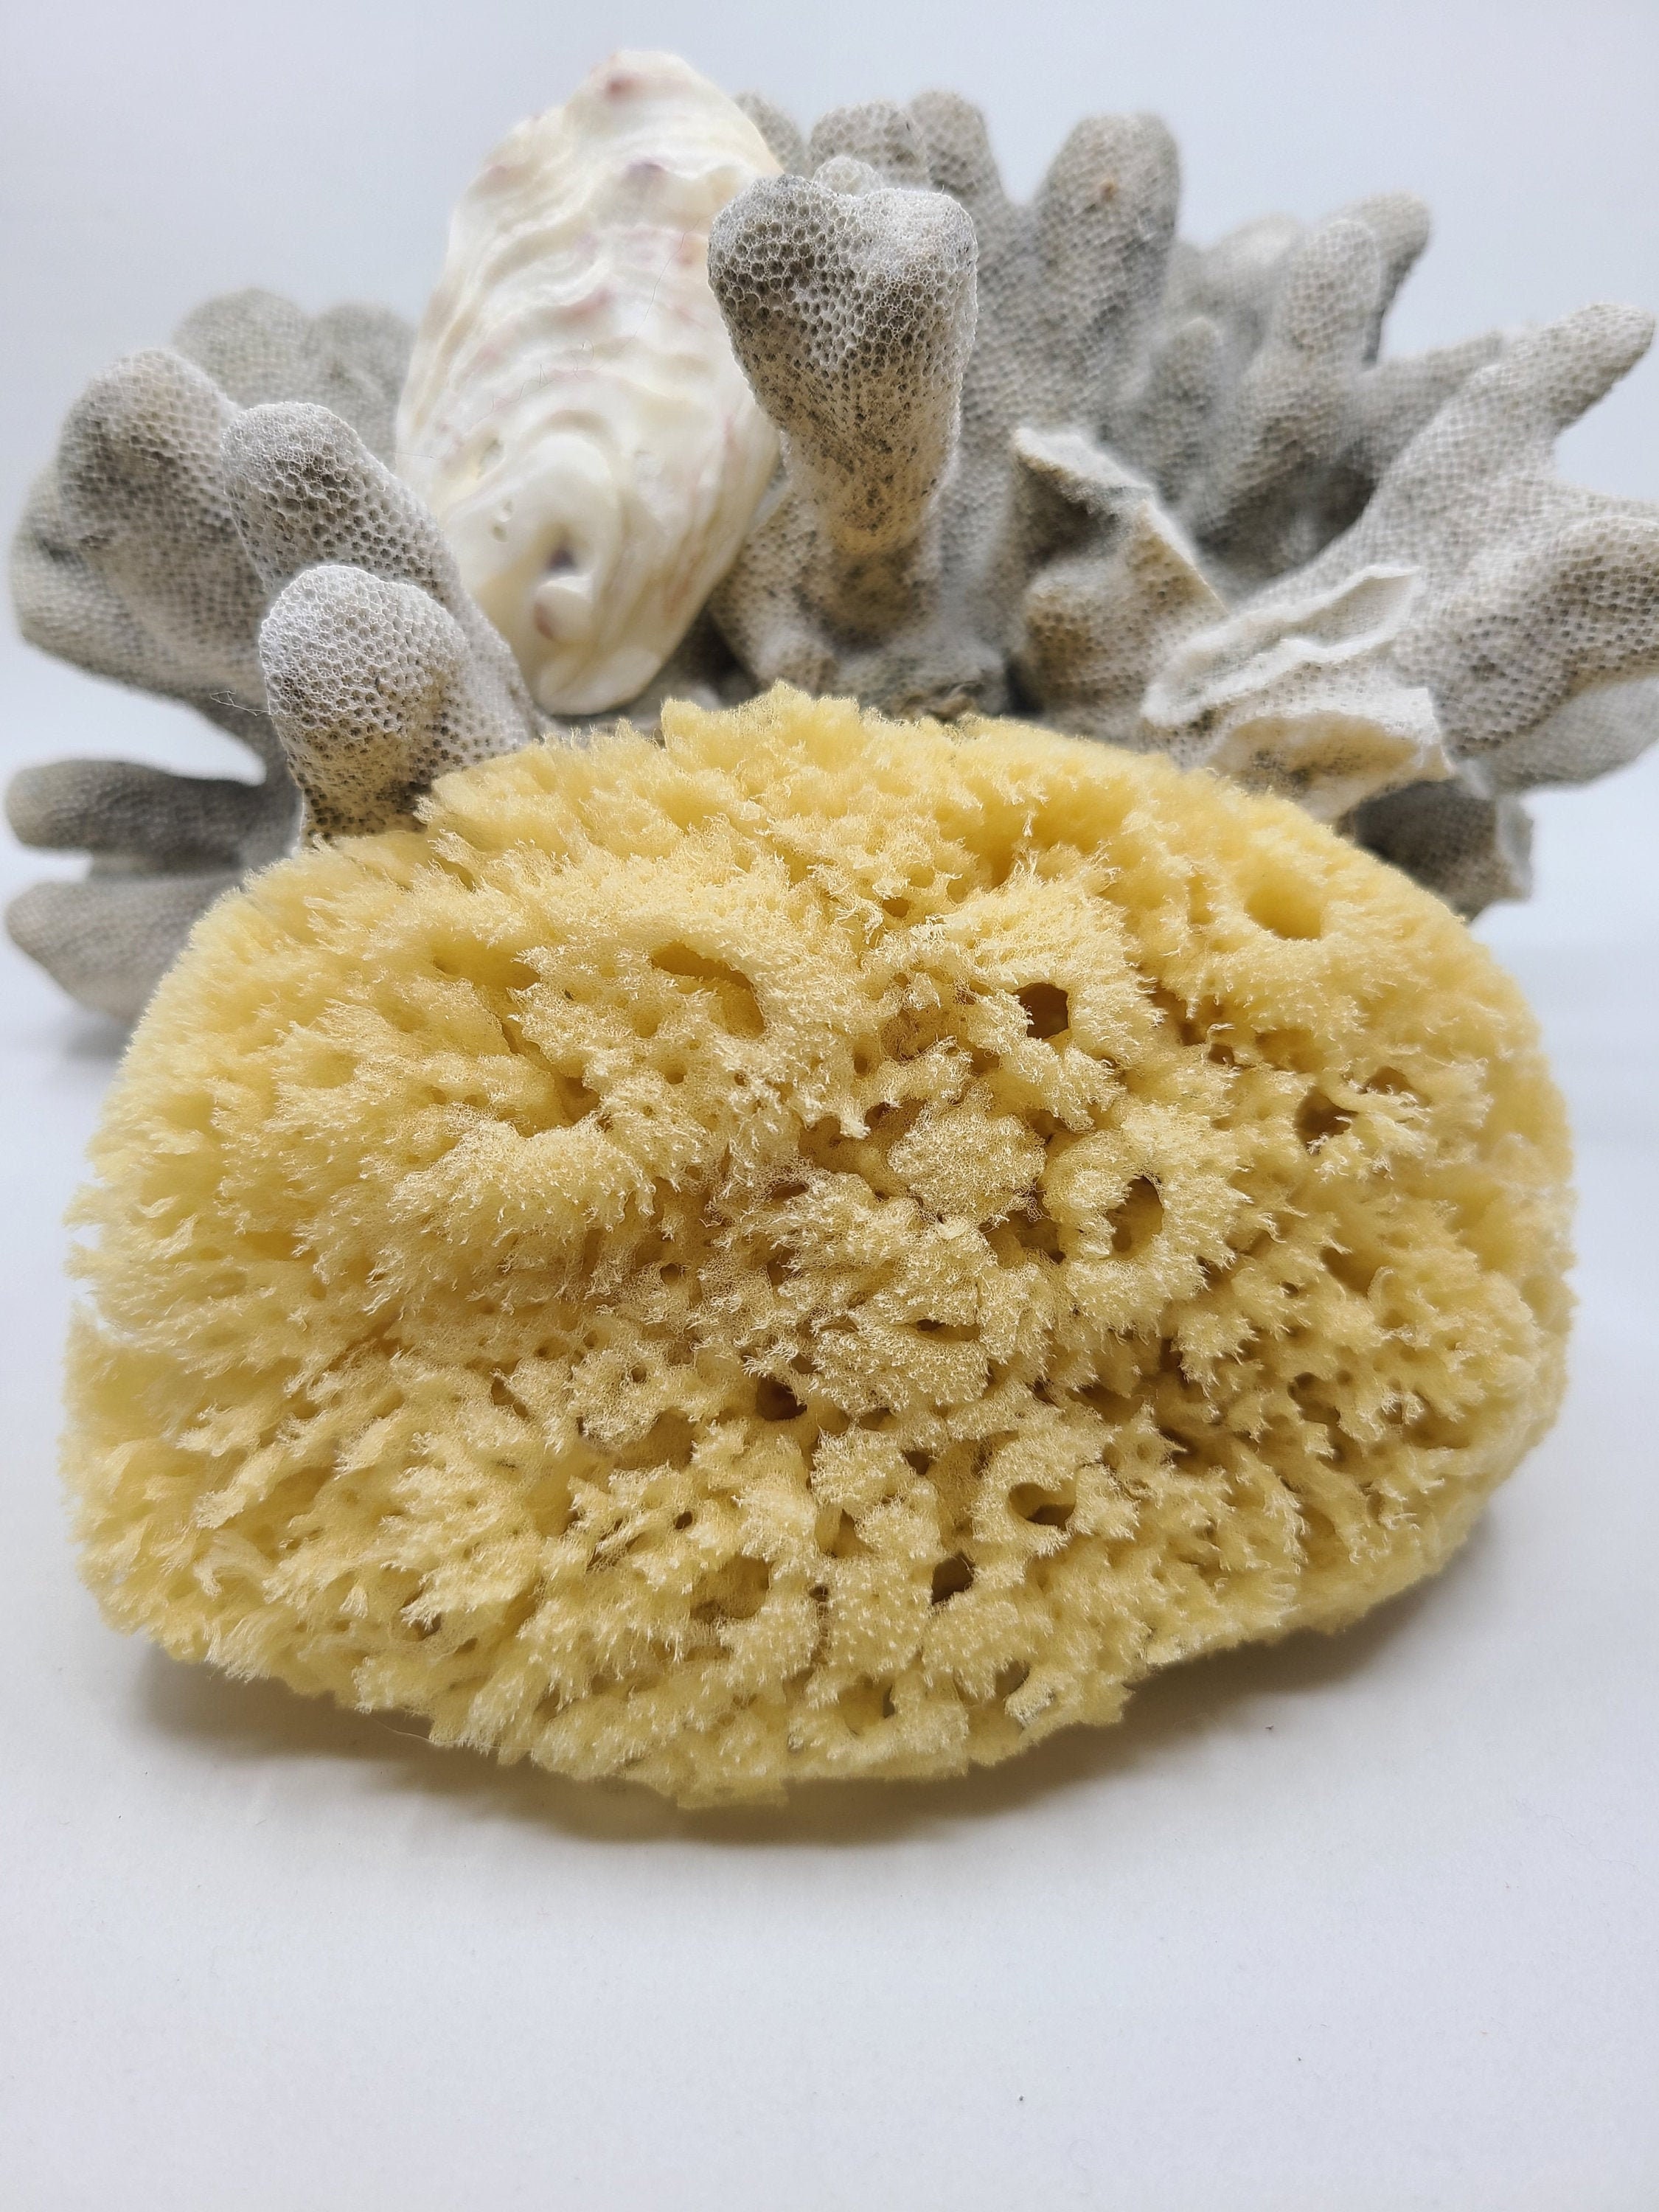 Natural Sea Wool Sponge - Gilded Olive Apothecary